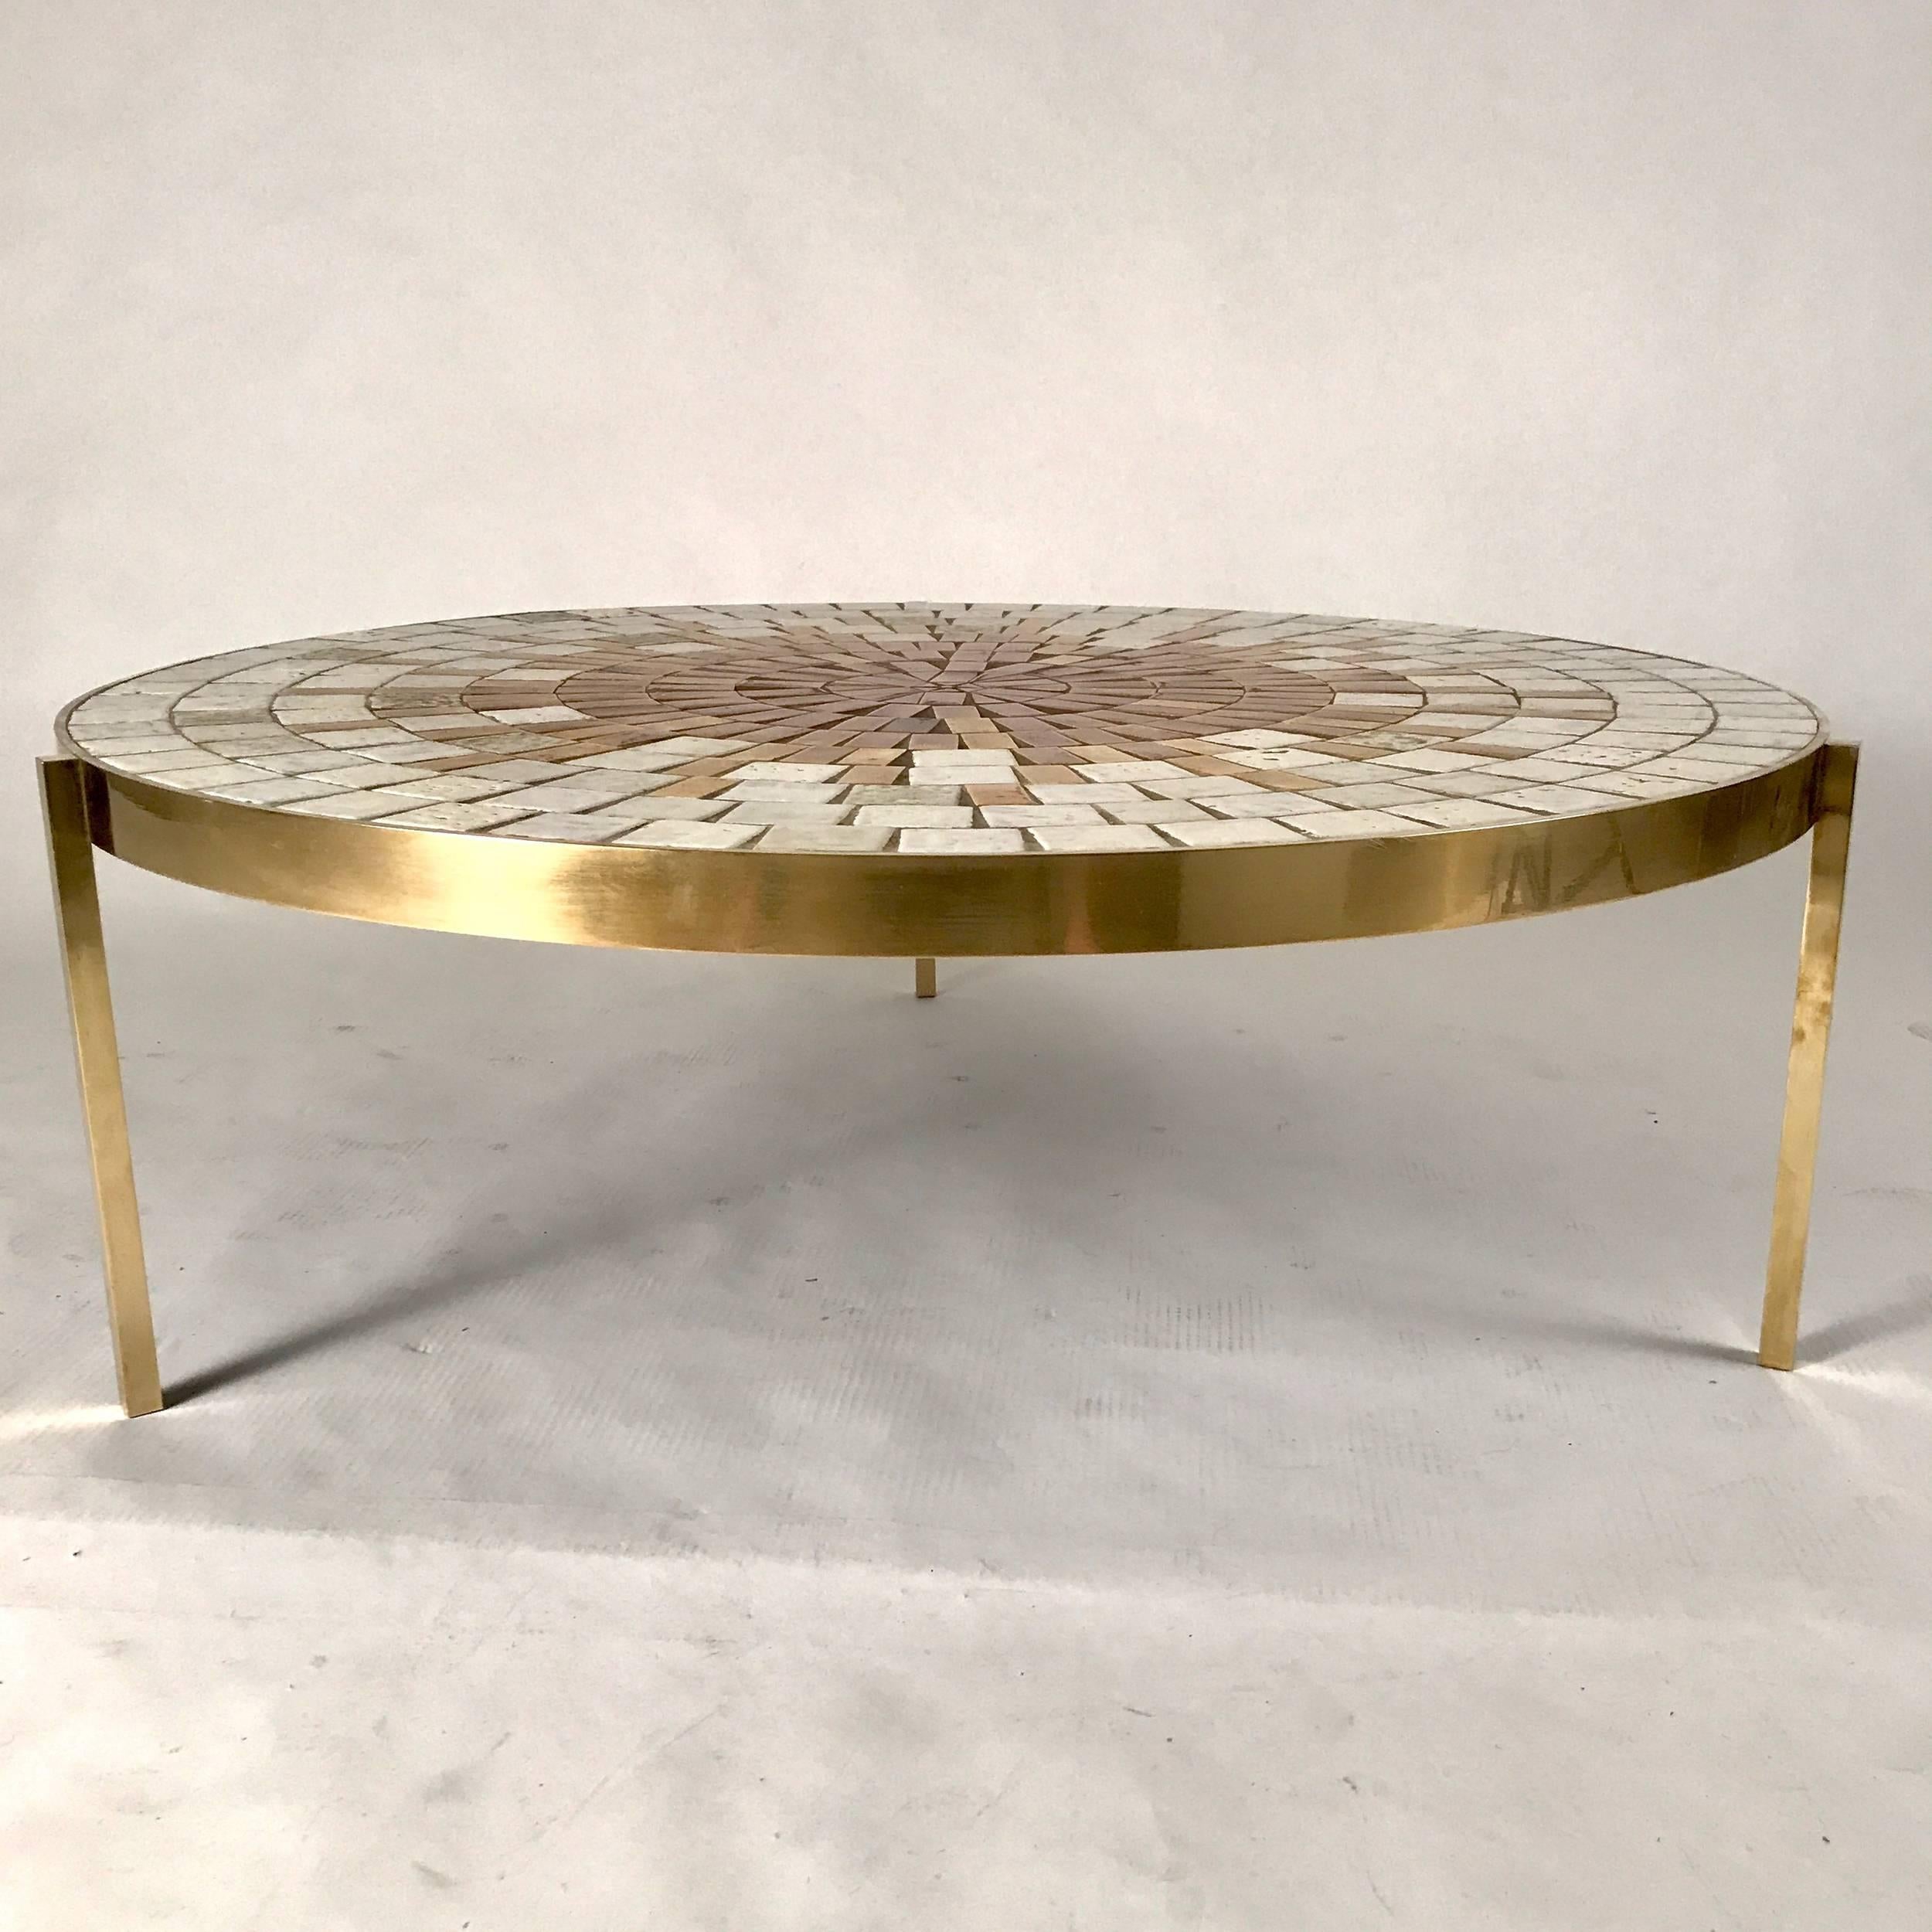 Glazed Rare Mosaic Top Table with Solid Brass Three-Legged Stilt Base by Mosaic House